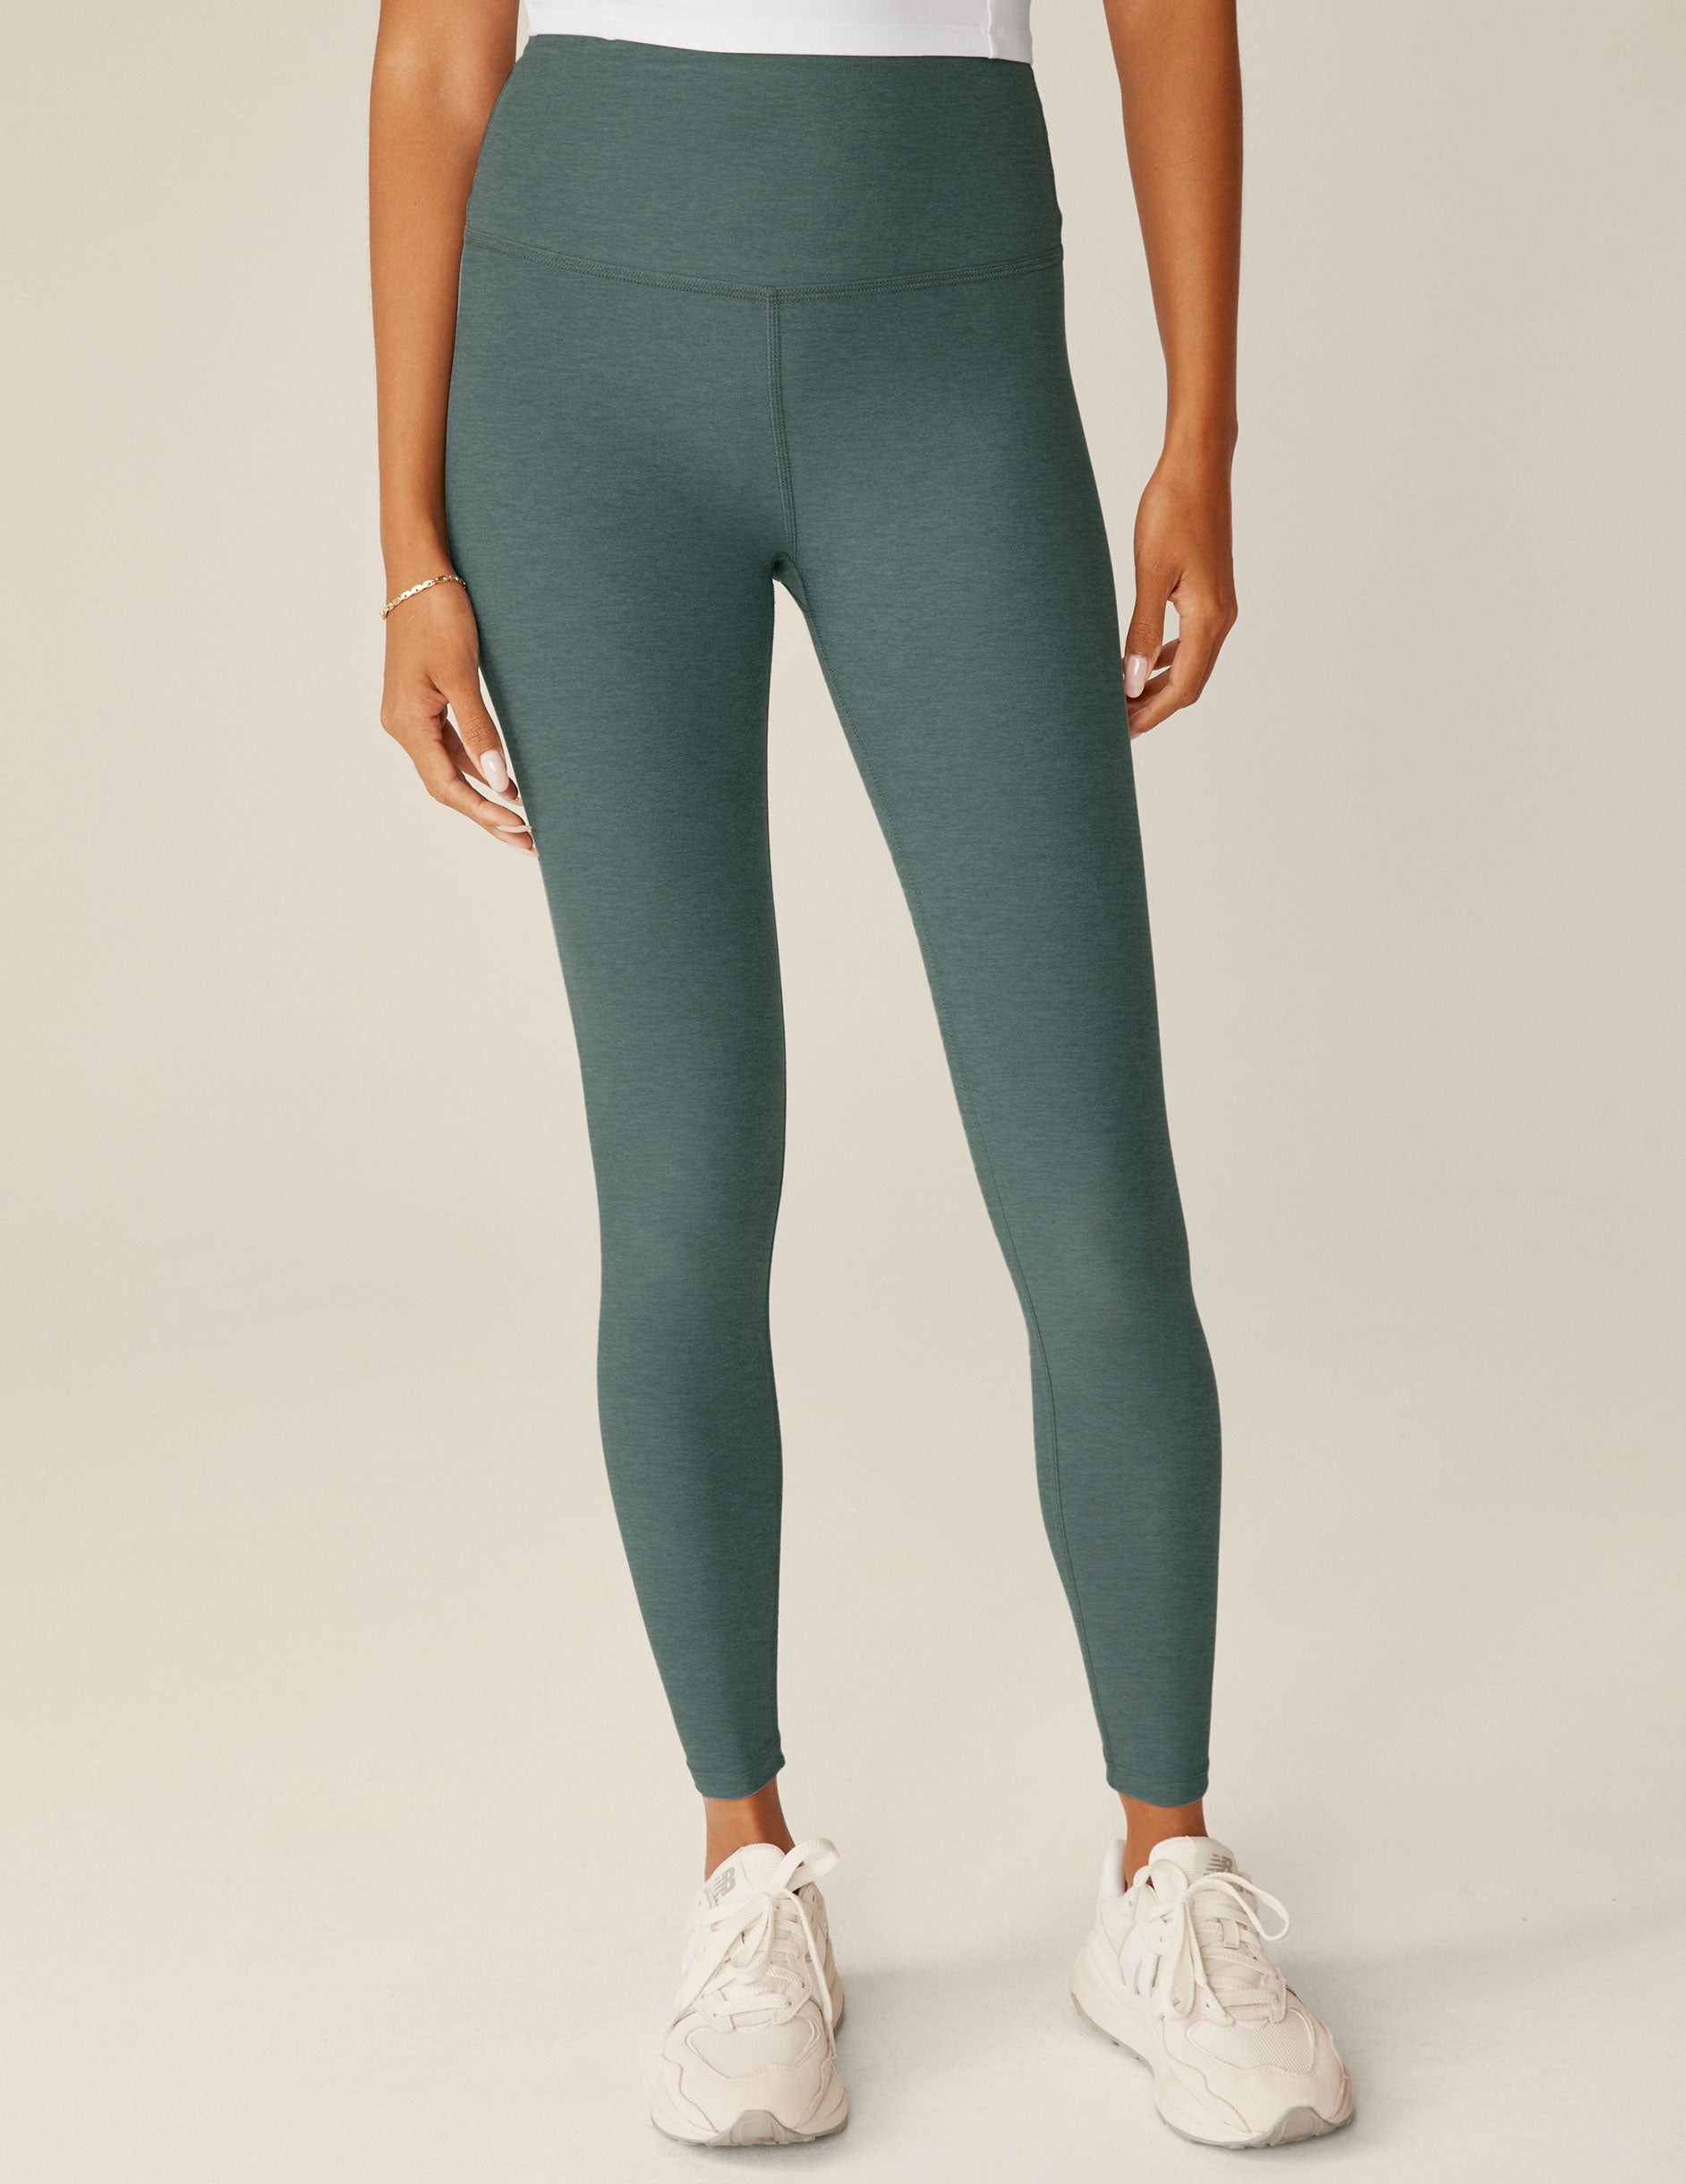 Beyond Yoga Spacedye Caught in the Midi High Waisted Legging Sca